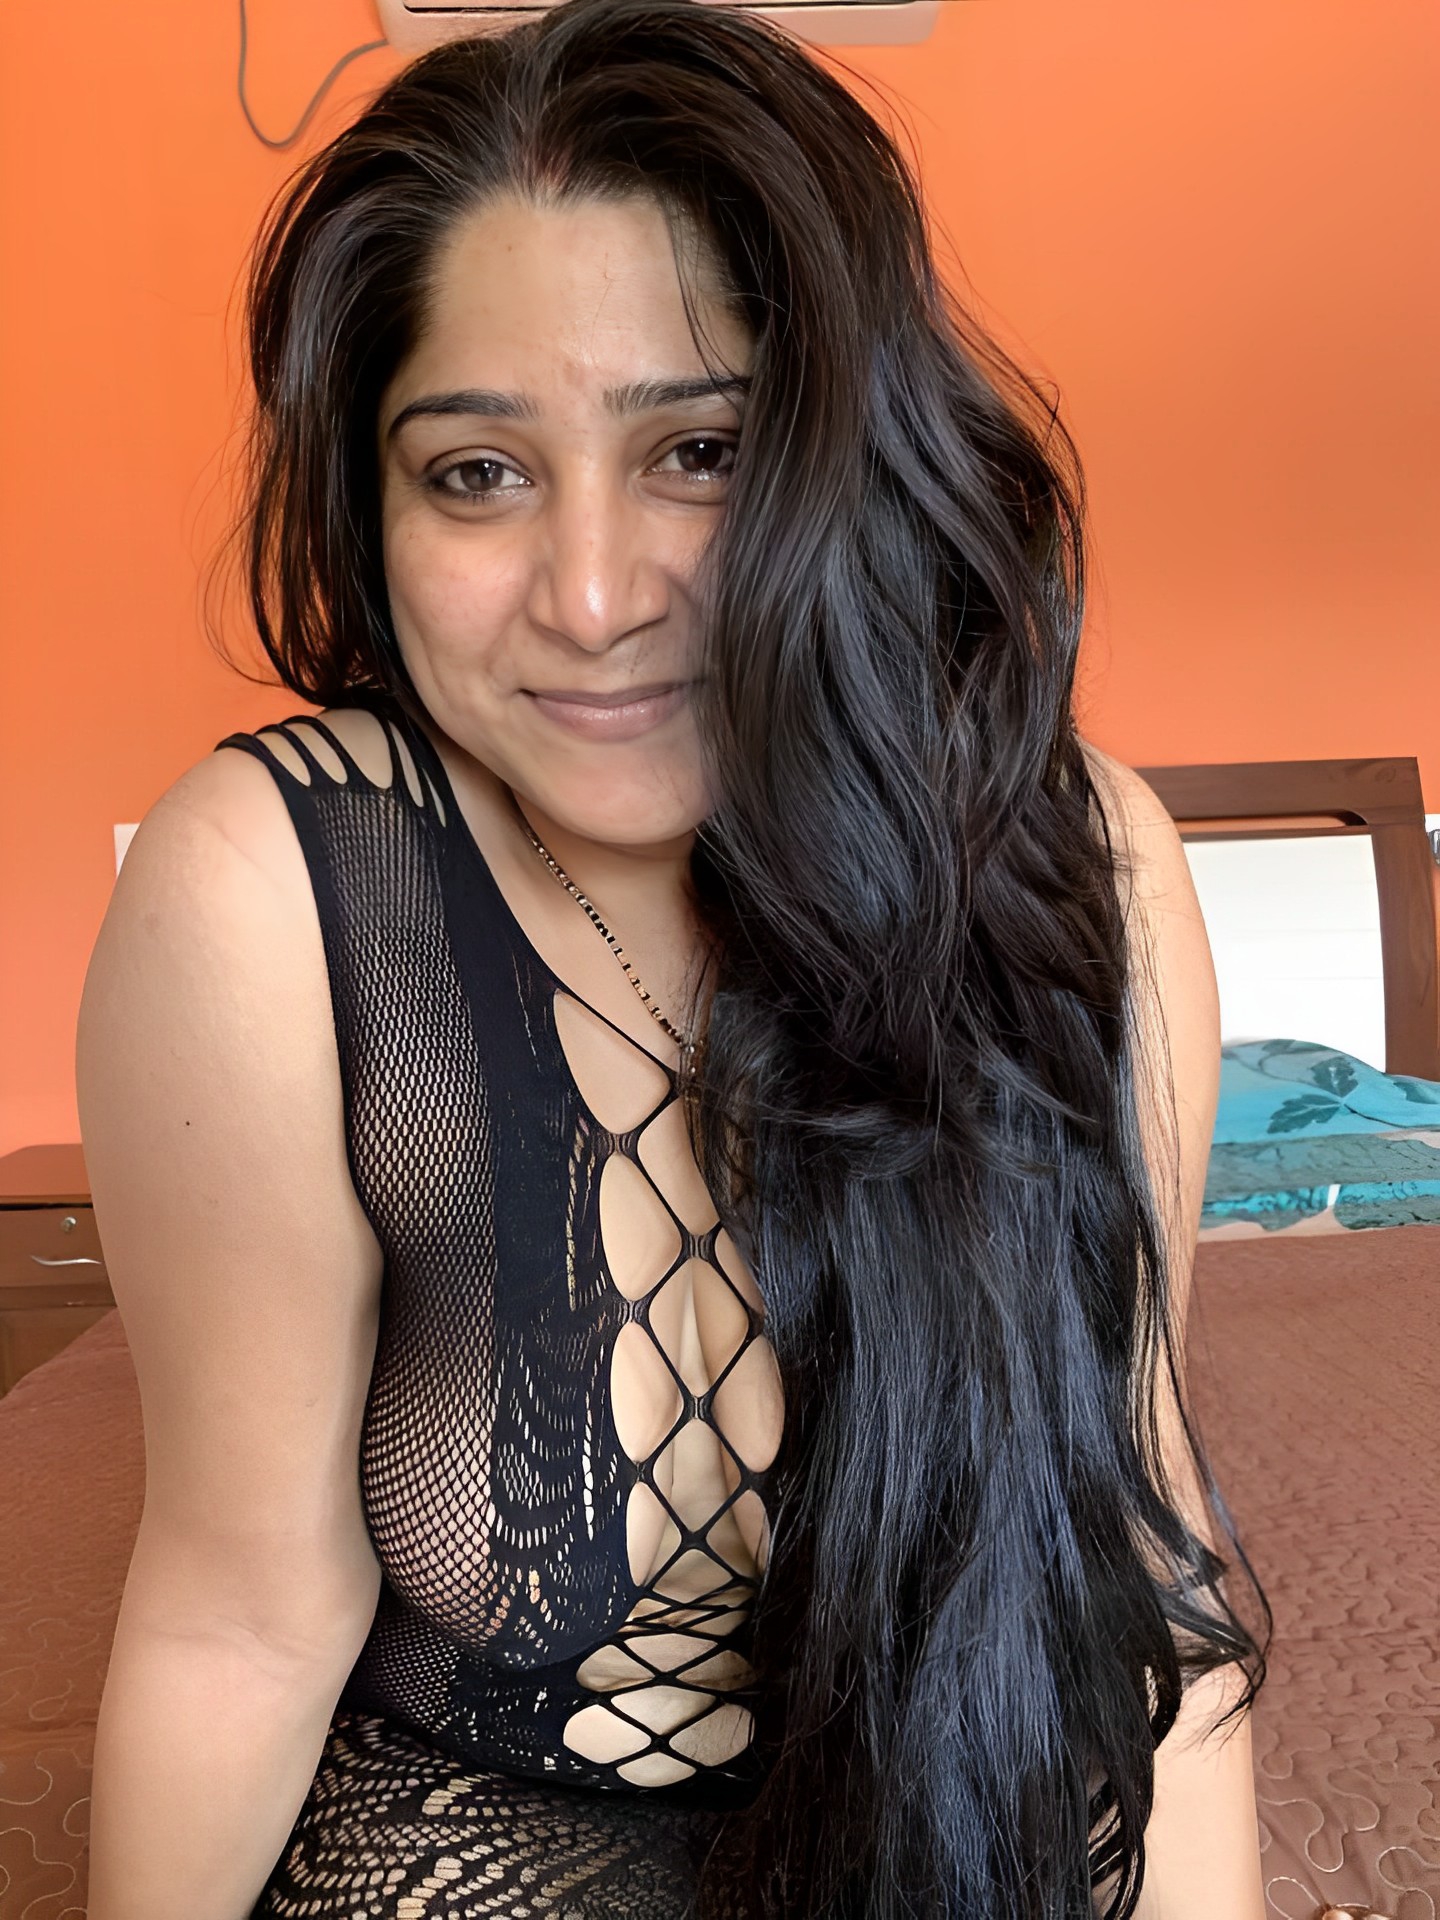 Indian Gorgeous Maal Naked Big Tits Exposing HD